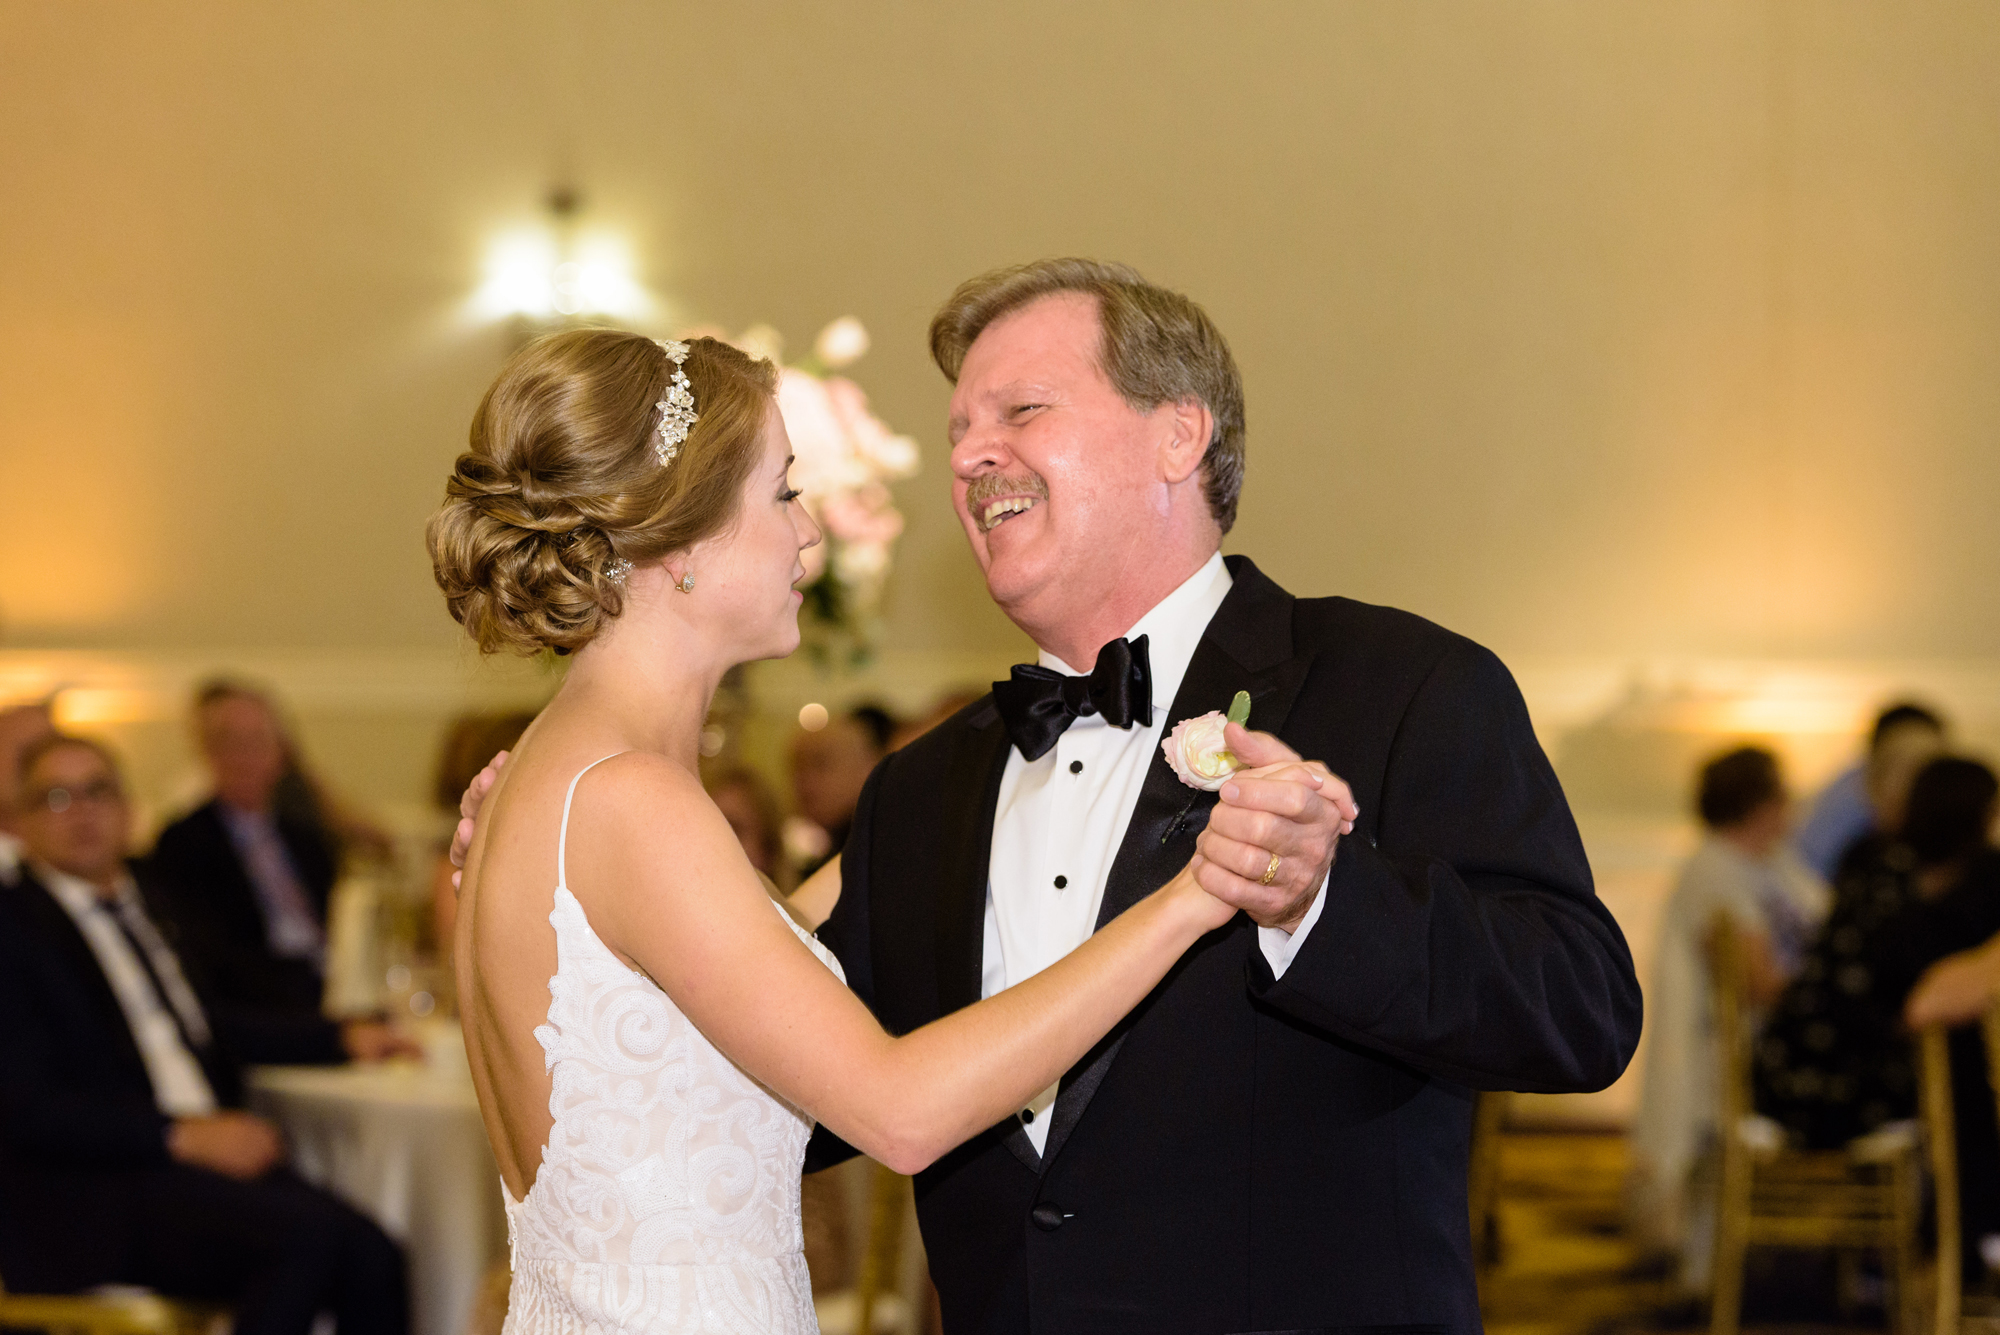 Father Daughter dance at a Wedding Reception at Morris Inn of Venue ND